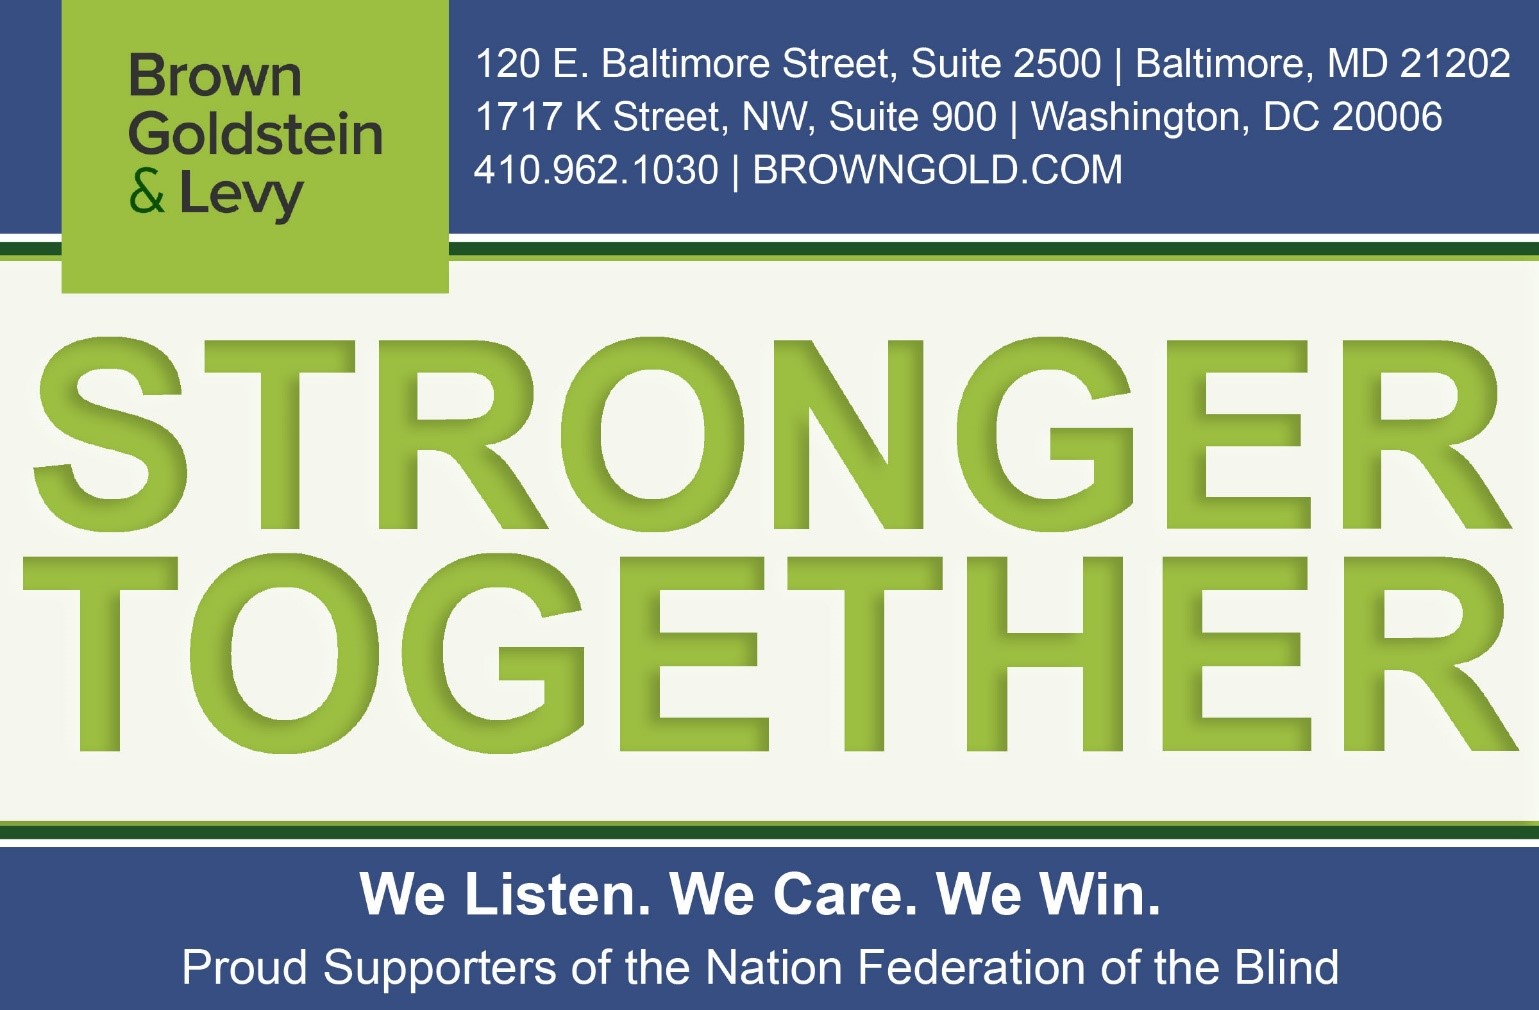 Brown Goldstein & Levy Stronger Together. We listen. We care. We win. Proud Supporters of the National Federation of the Blind. Baltimore, MD | Washington, DC | 410-962-1030 | BROWNGOLD.COM